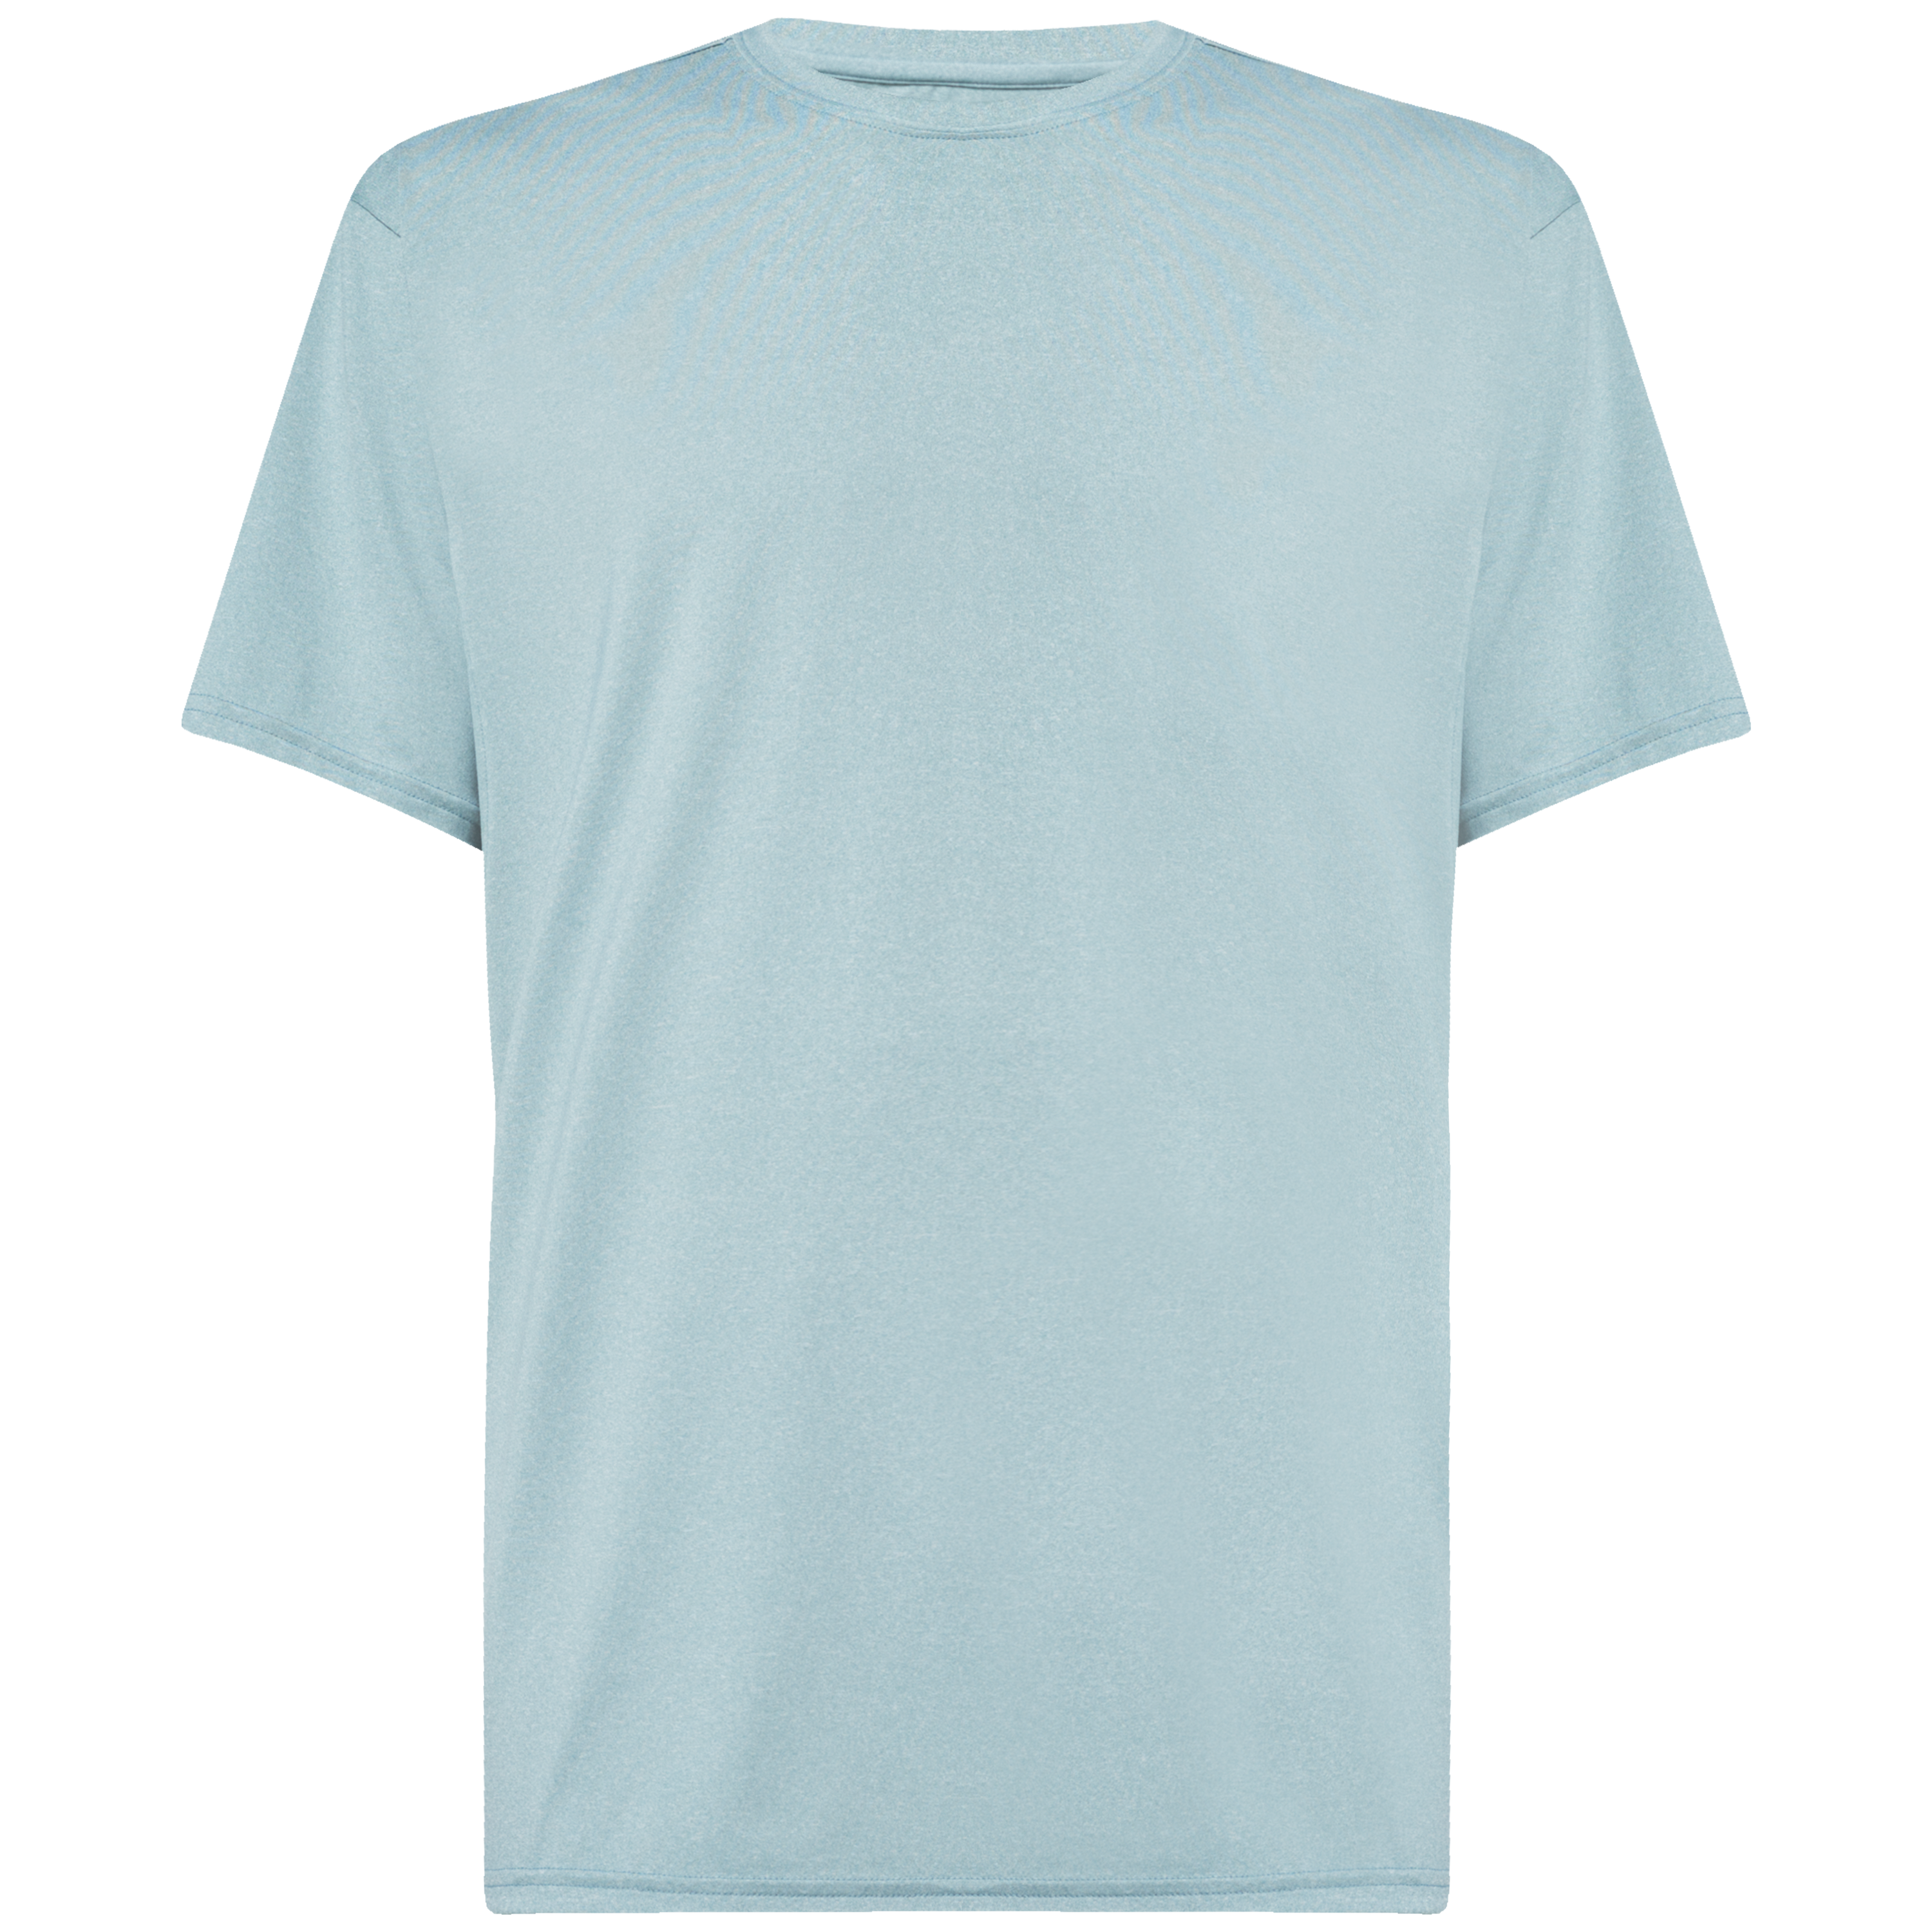 Details about   New COSTA DEL MAR See What's Out There Large Gray Heather T Shirt 